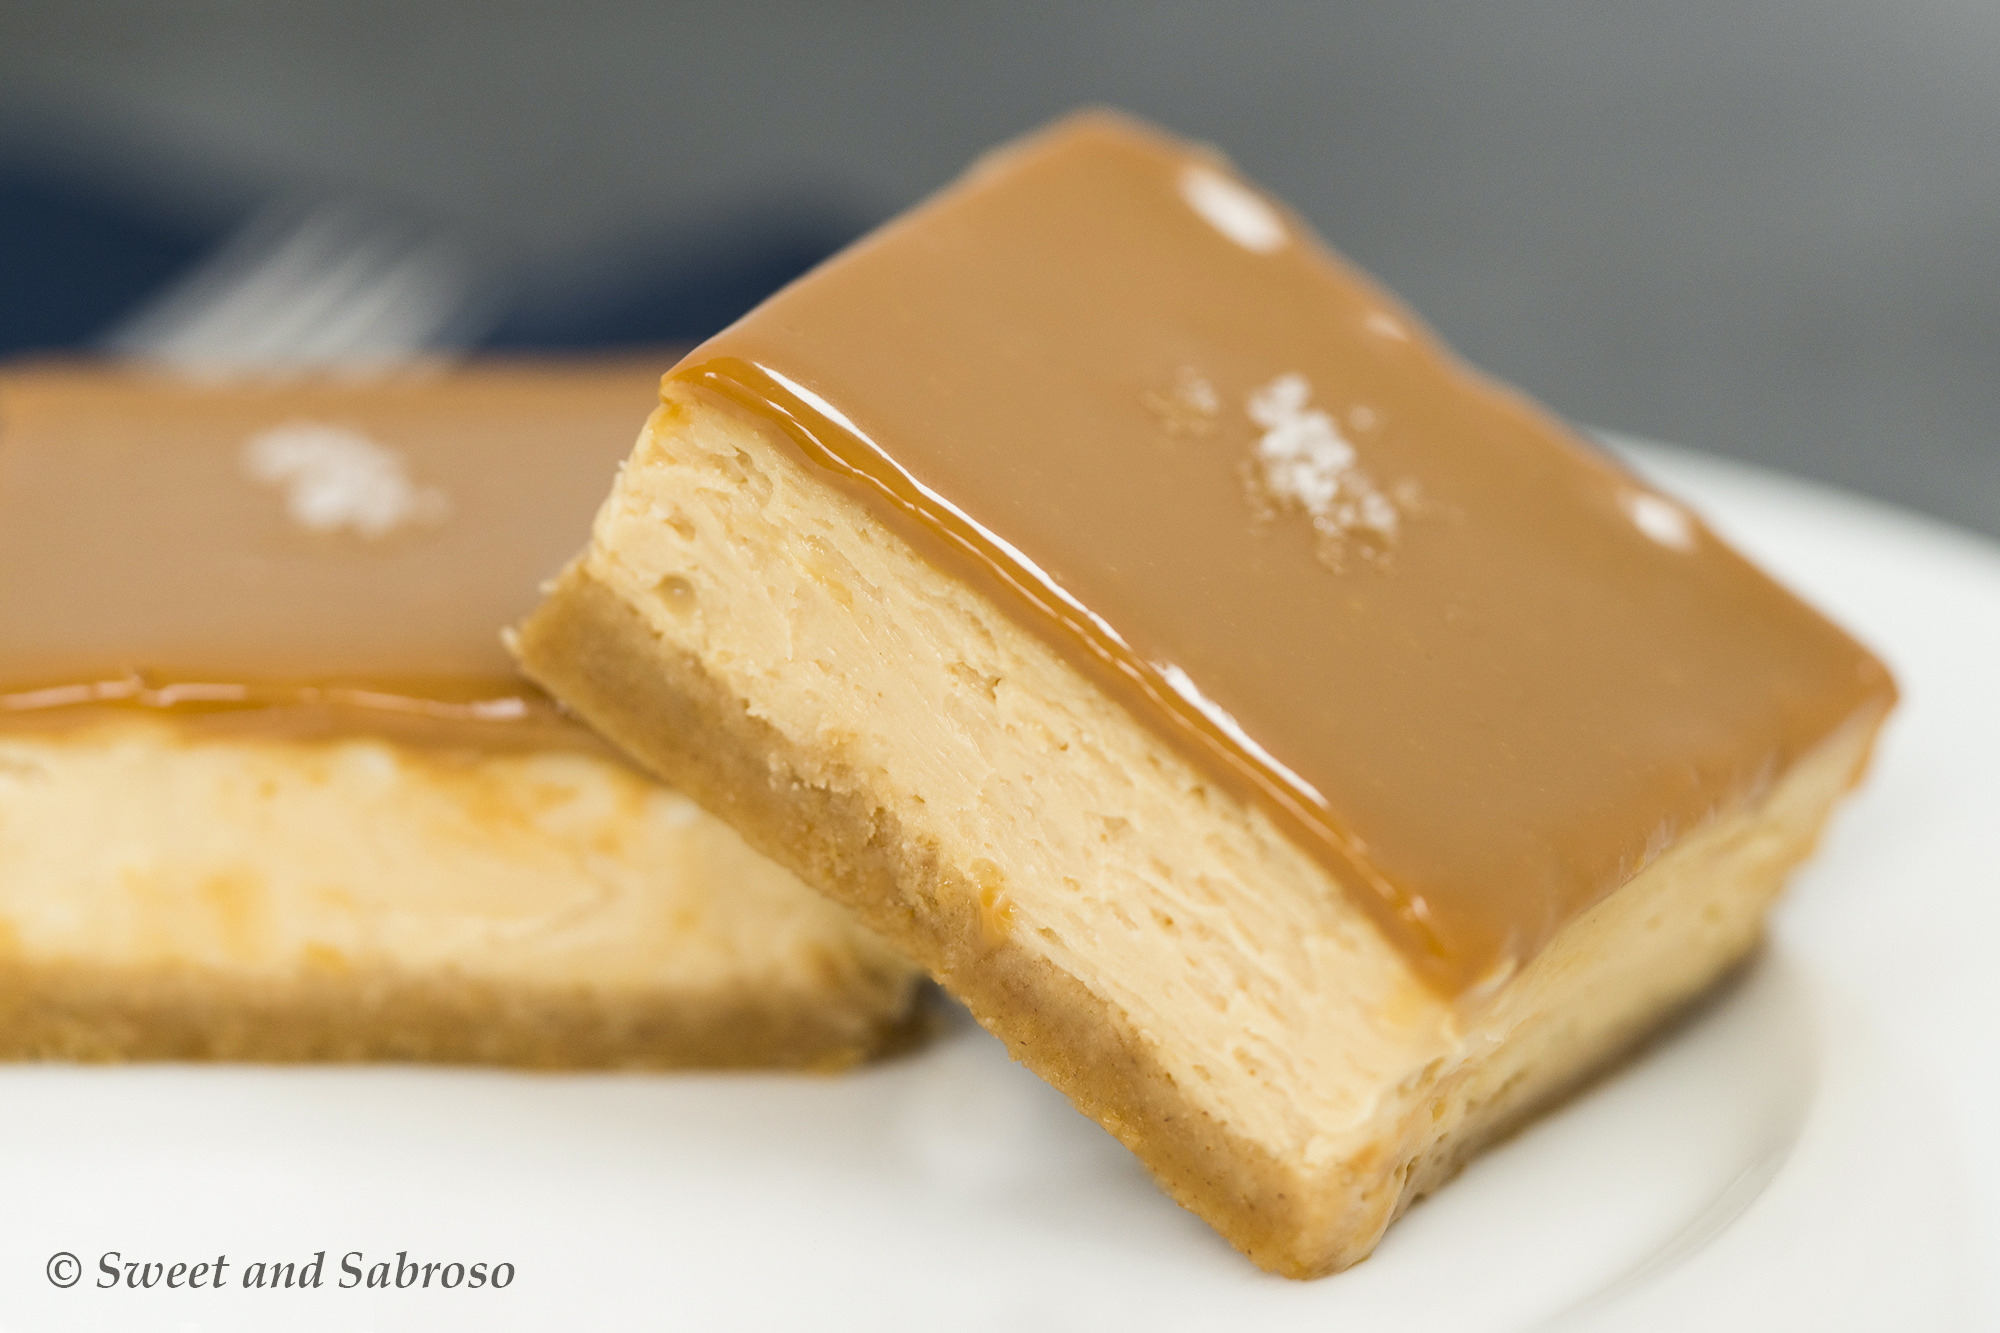 Two Heavenly Salted Dulce de Leche (Caramel) Cheesecake Bars